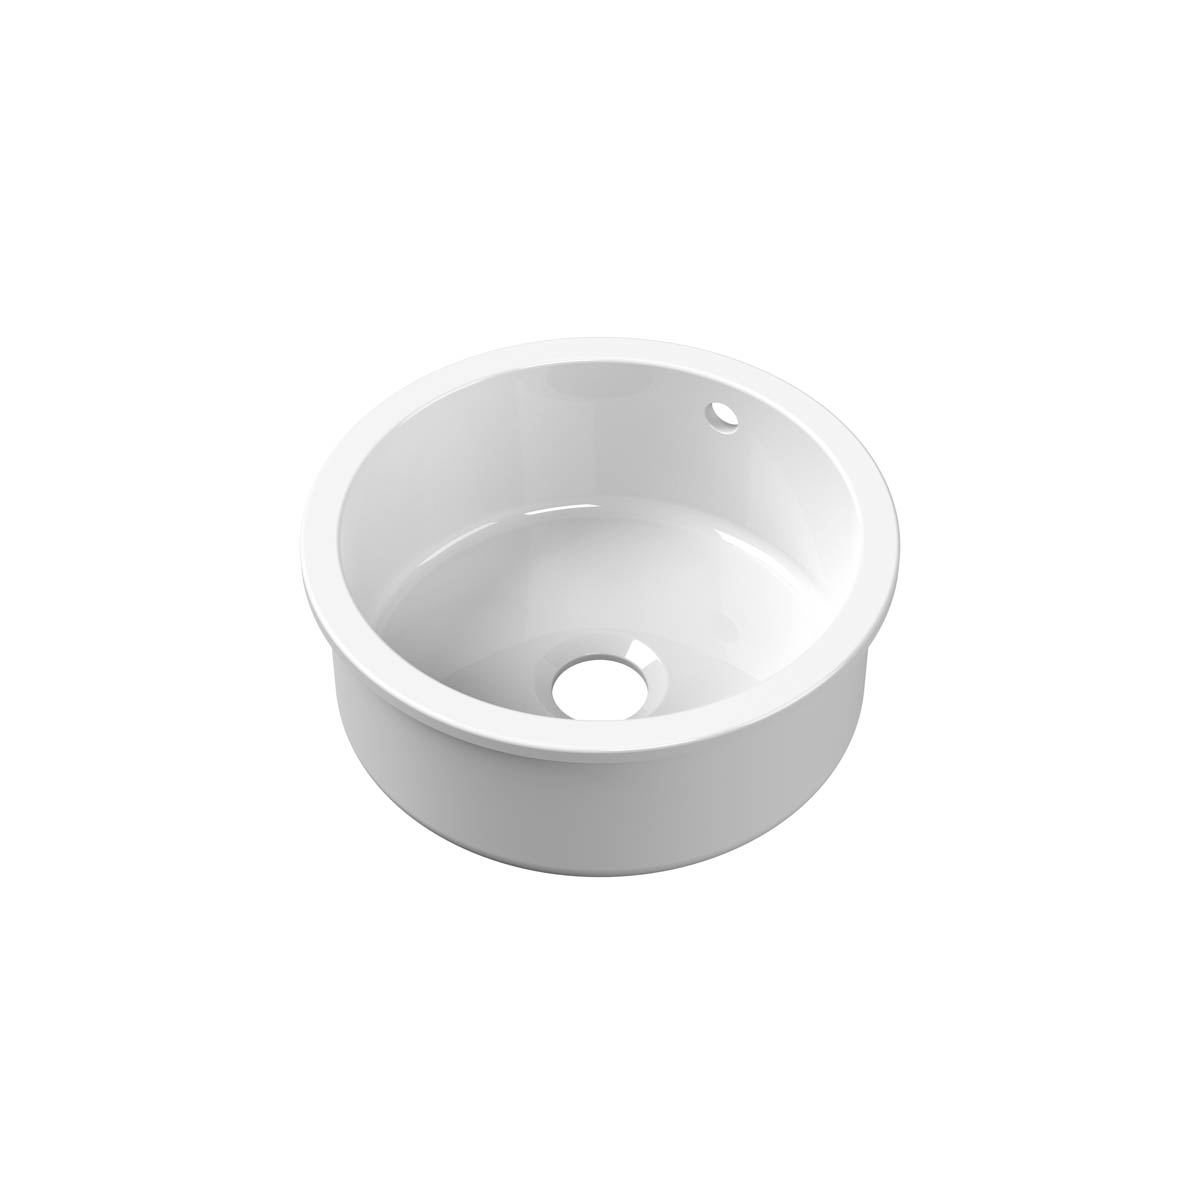 Nuie 460x460x191mm Round Inset or Undermount Sink with 90mm Central Waste & Overflow - White (20323)